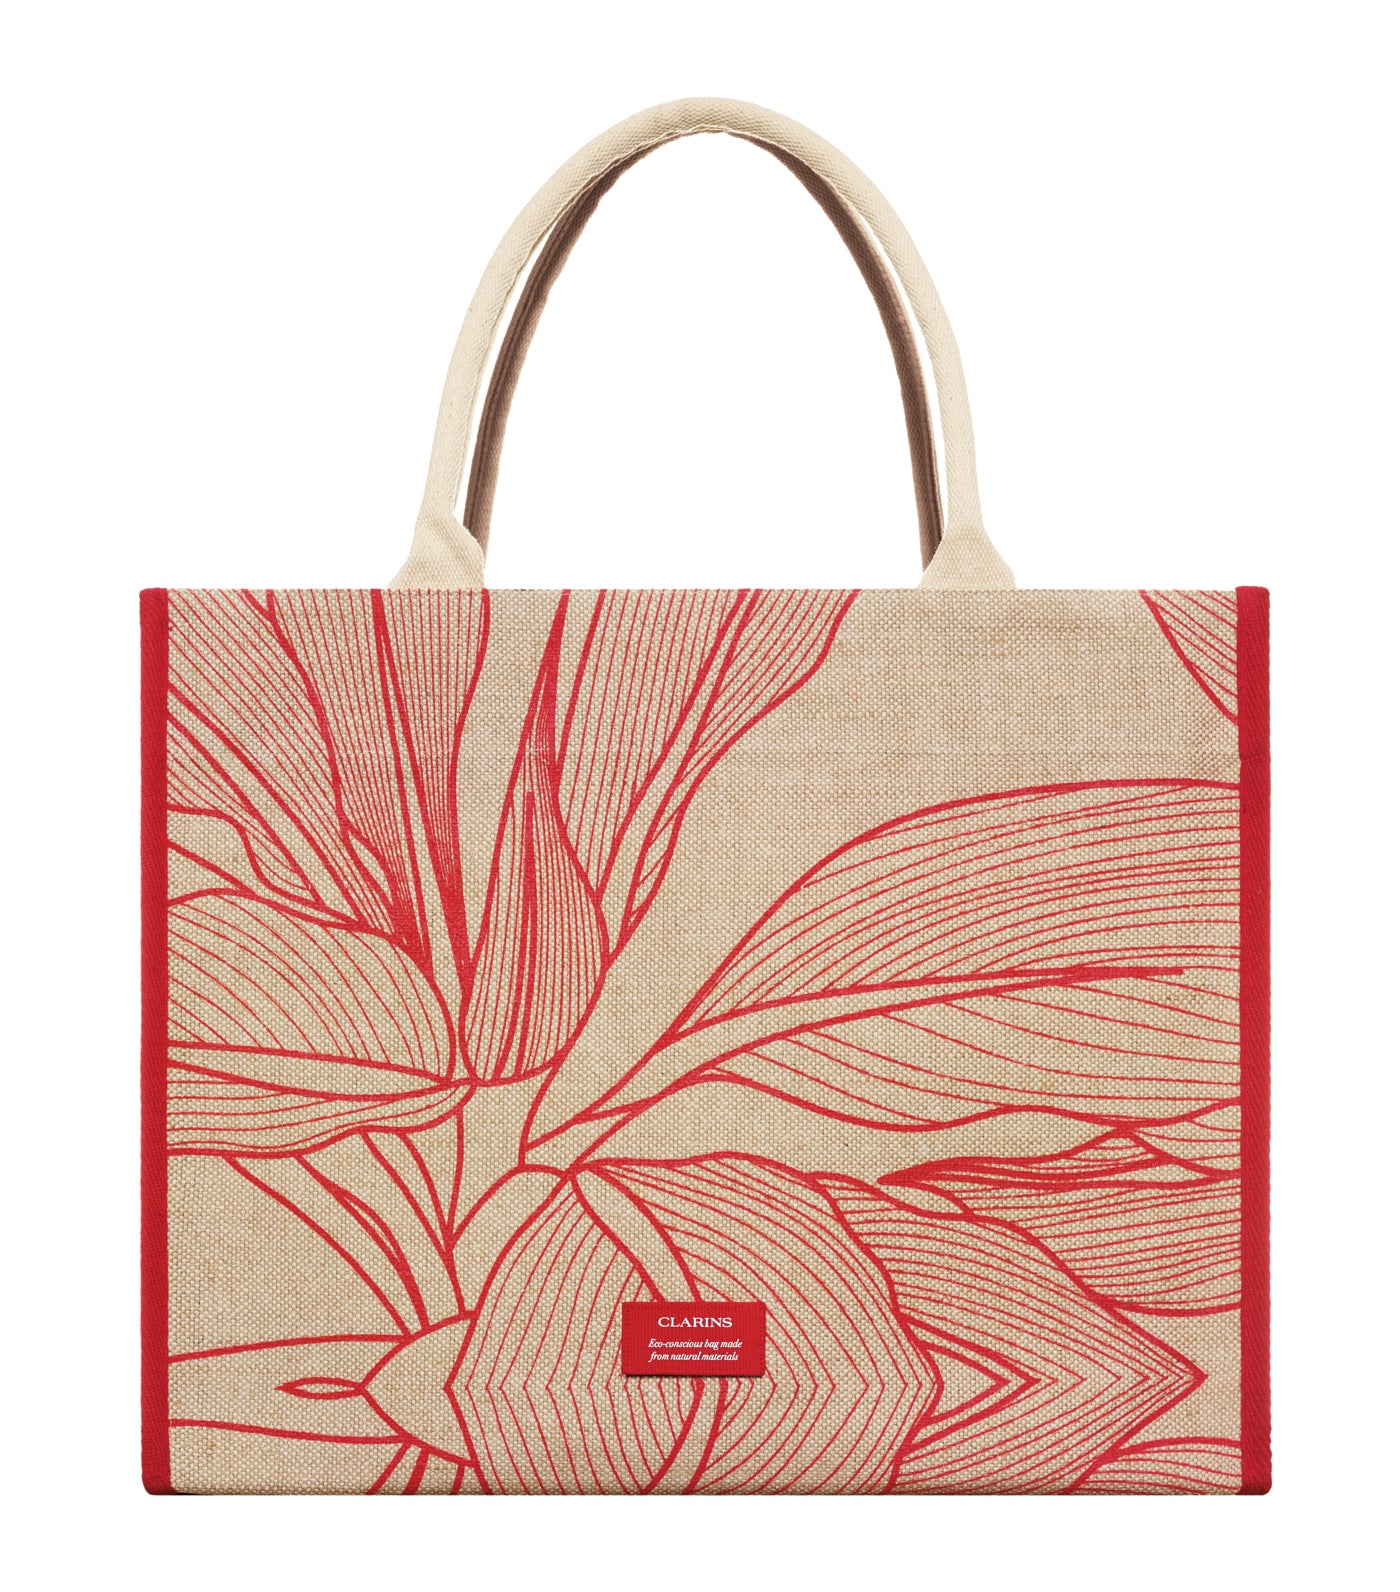 insurance Dinner Stupid Clarins Free Tote Bag